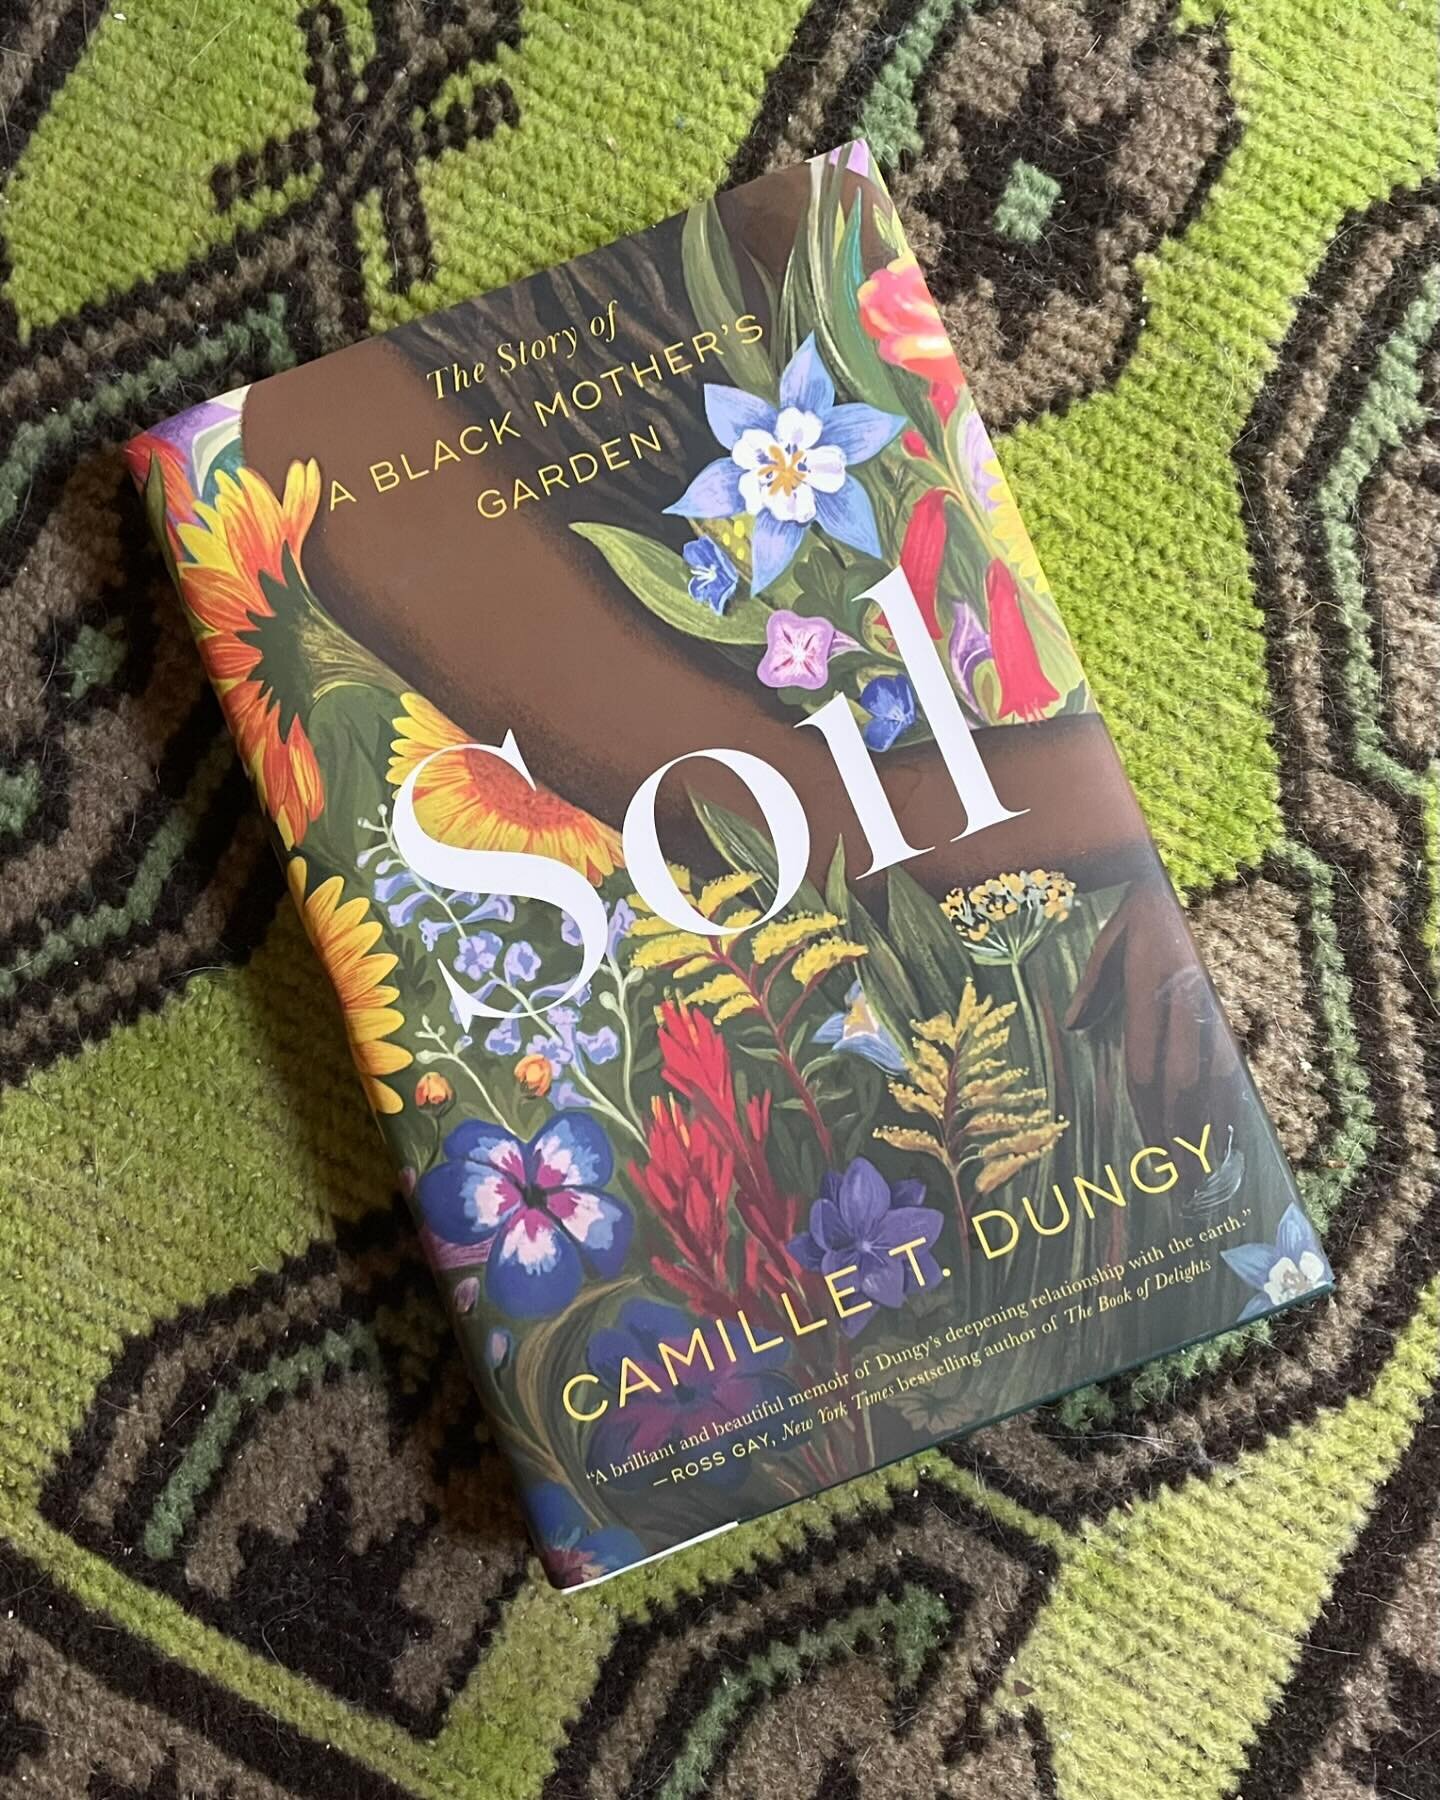 On Wednesday, February 21, join trustee Cole Tucker-Walton and Town open space manager John McLeran for the second Nature Book Club, presented with @marktwainlibraryct and @newpondfarm. You still have a few weeks to read &ldquo;Soil: The Story of a B